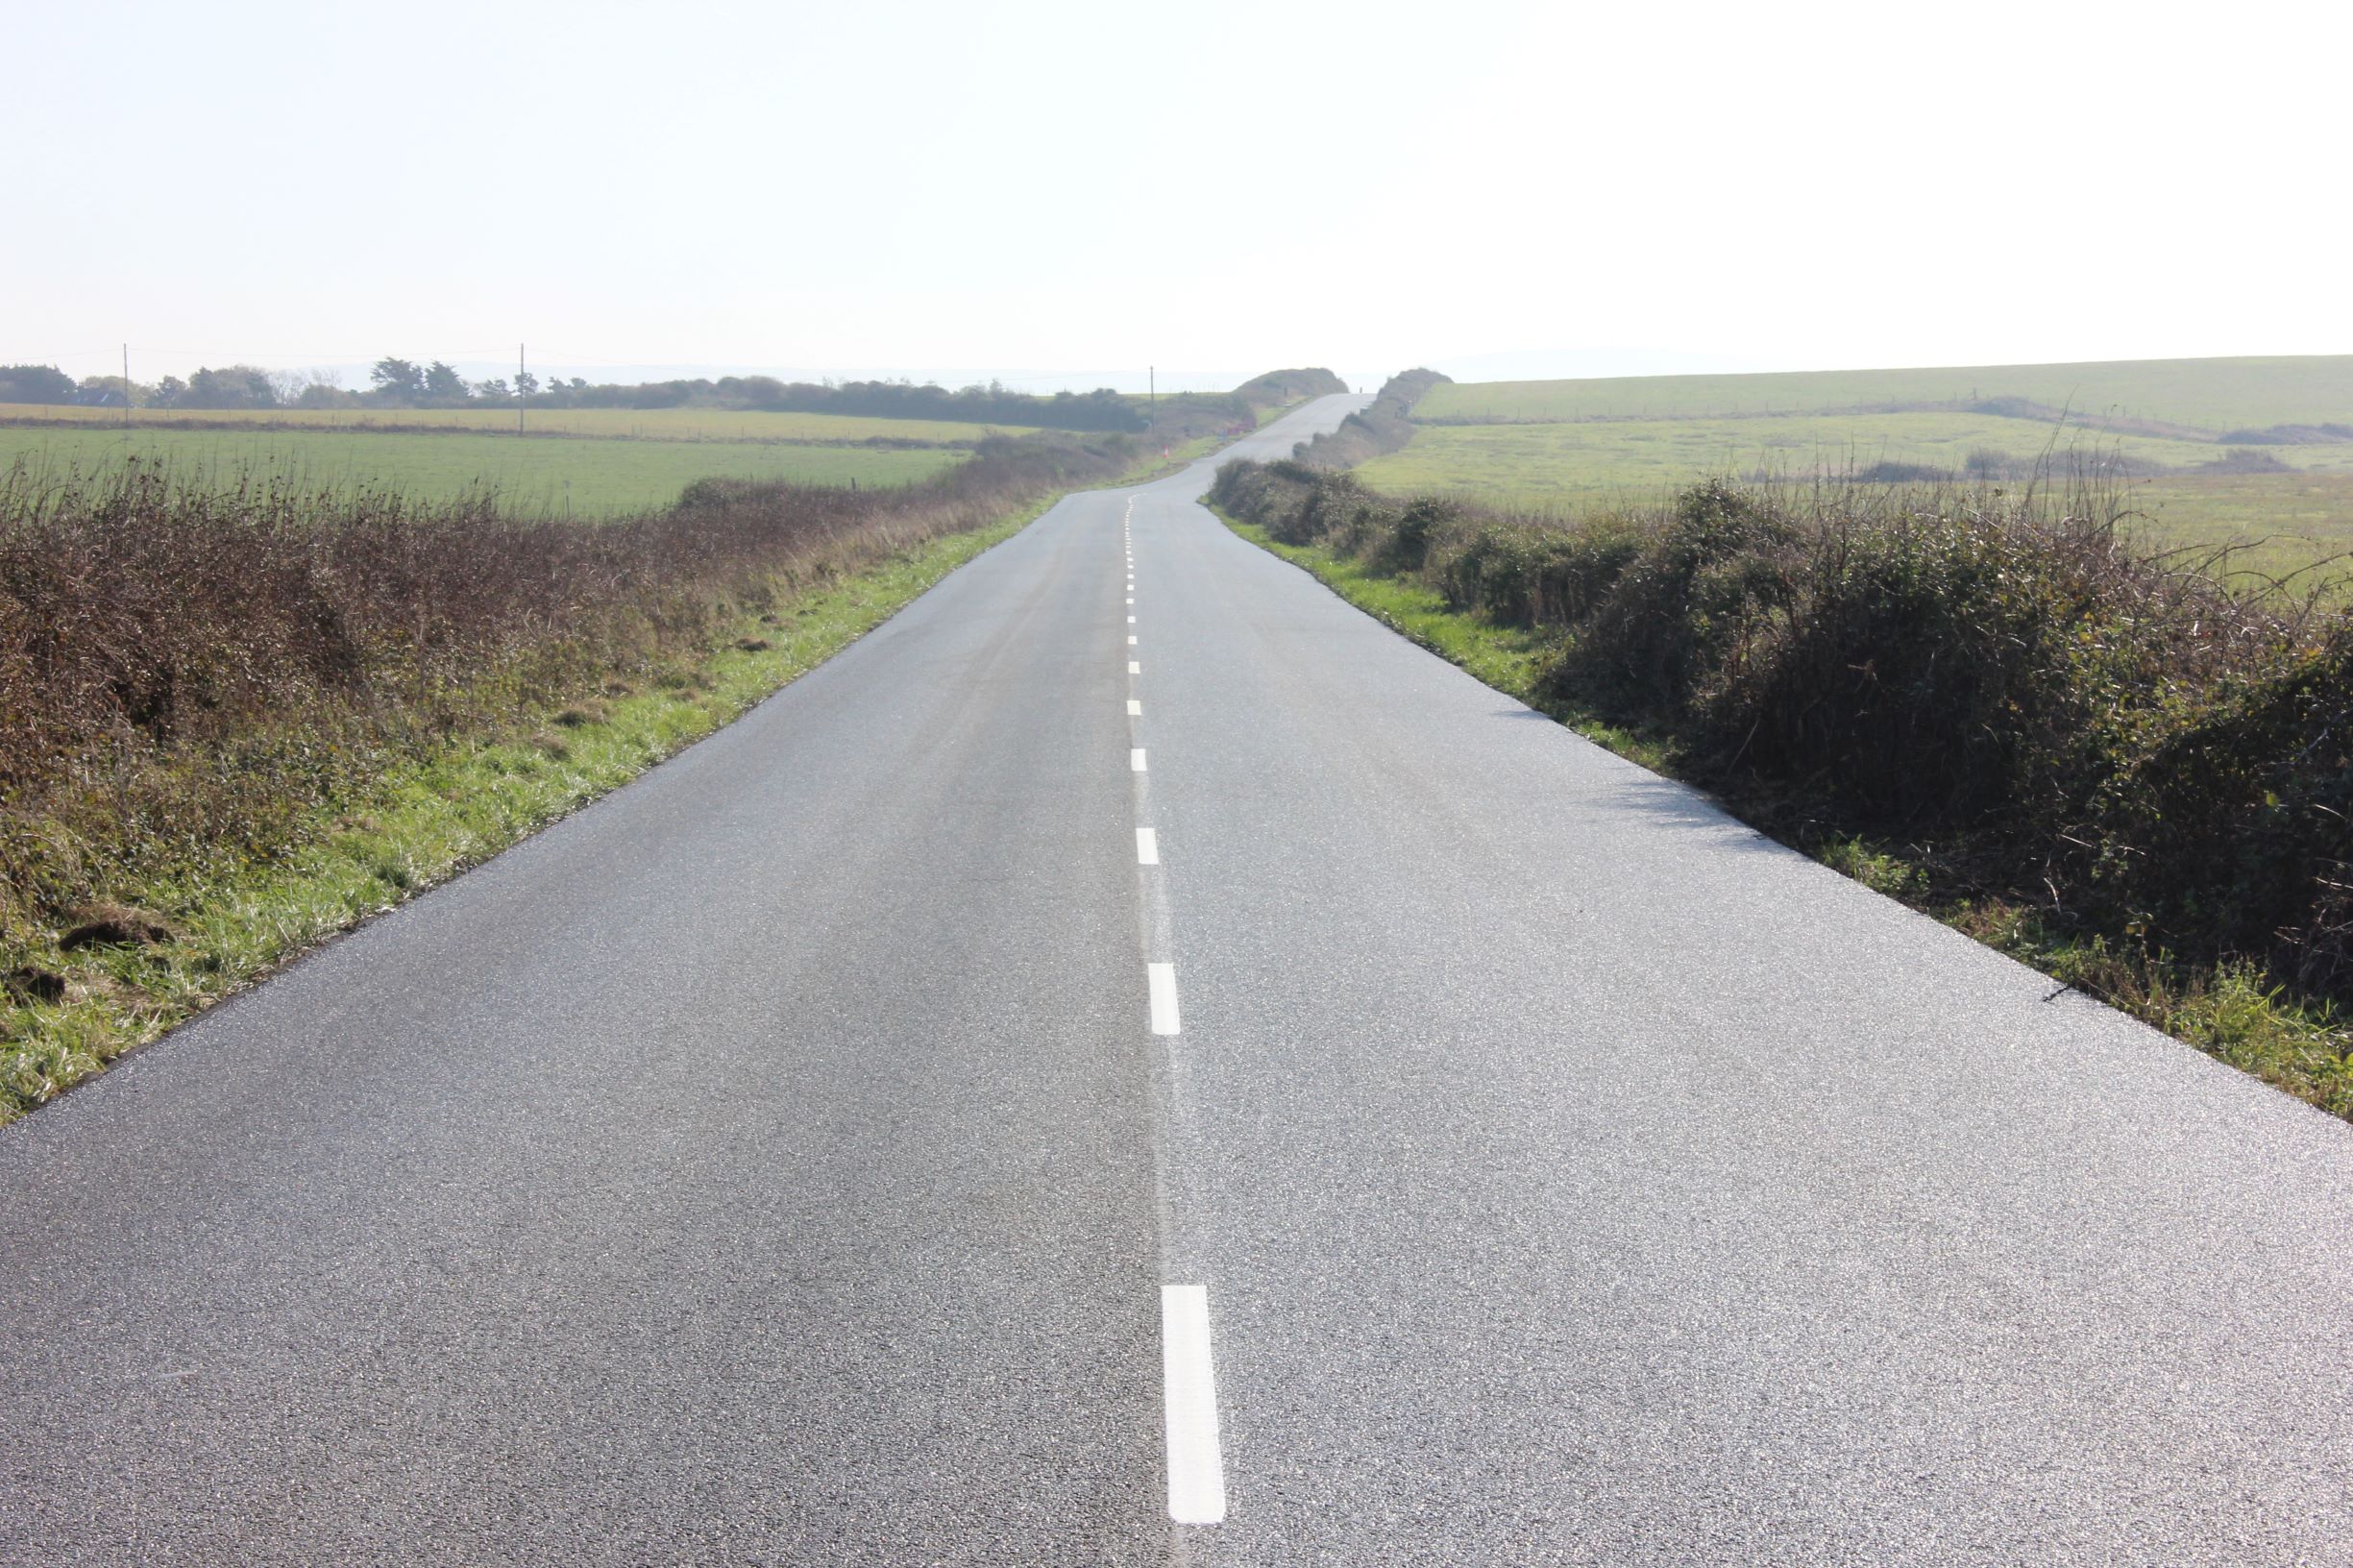 smooth lined road surface going into the distance with fields either side